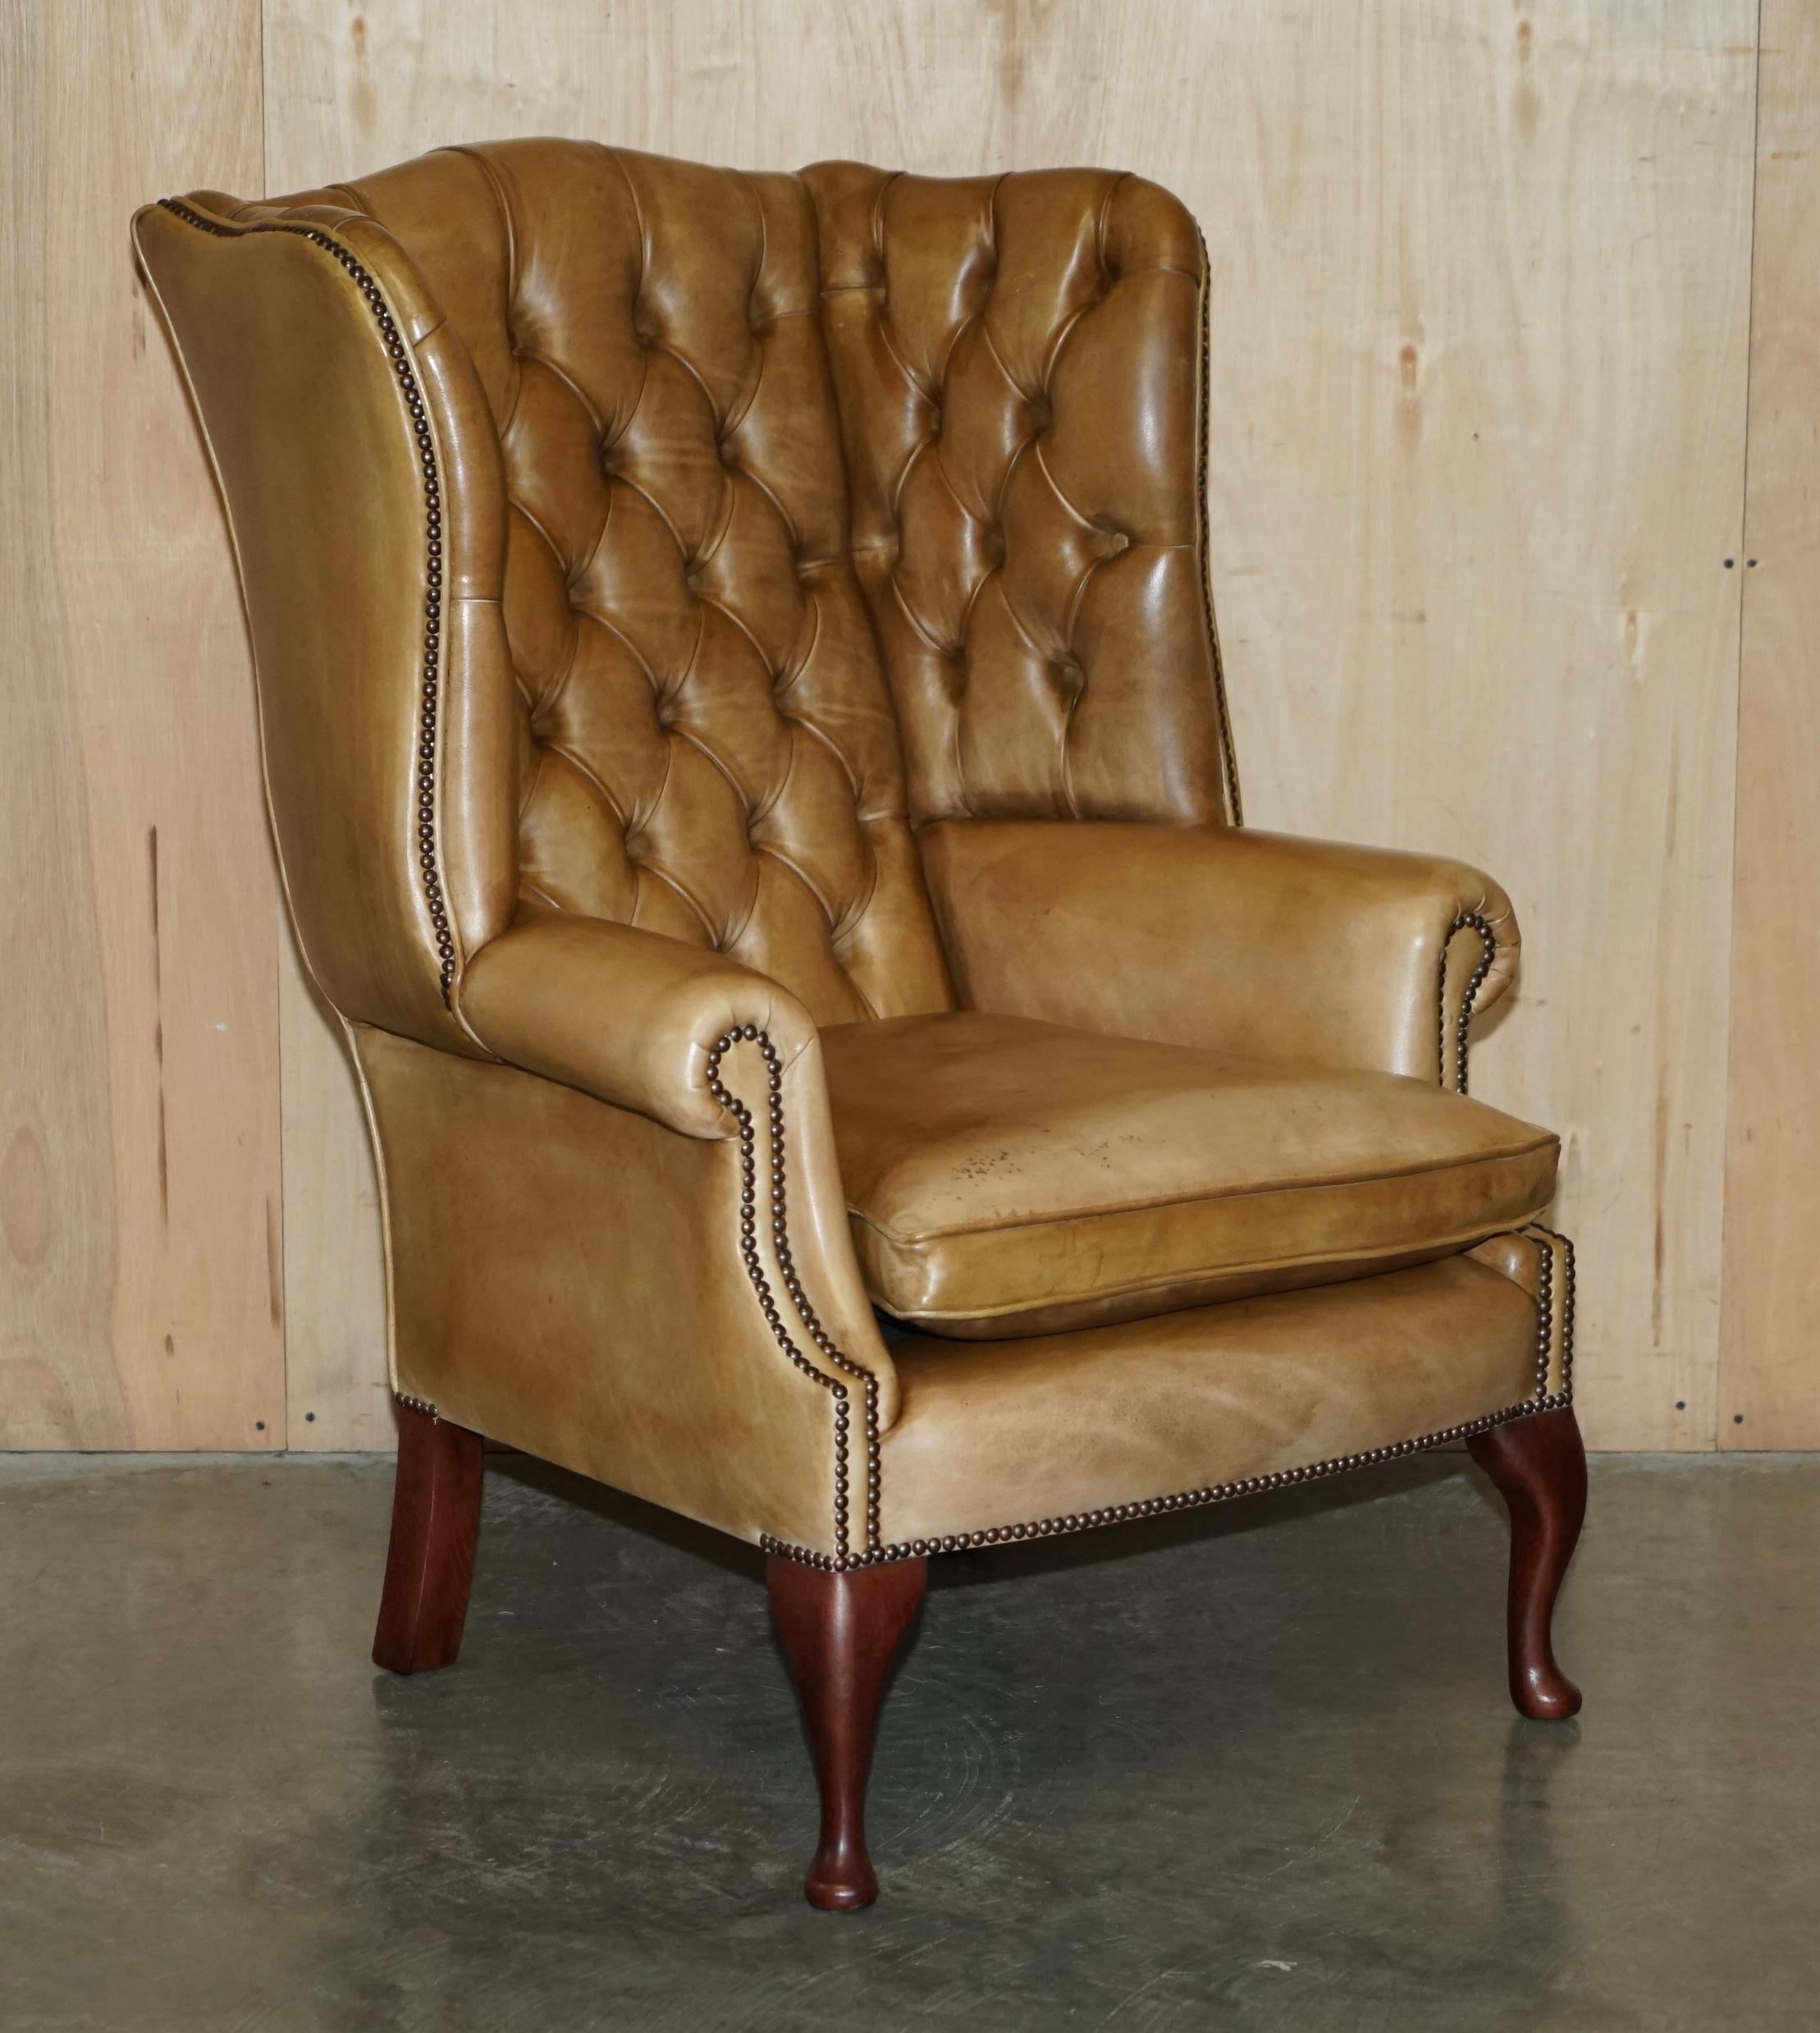 PAIR OF VINTAGE Tan BROWN LEATHER CHESTERFiELD WINGBACK CHAIRS WITH FOOTSTOOLS im Angebot 4